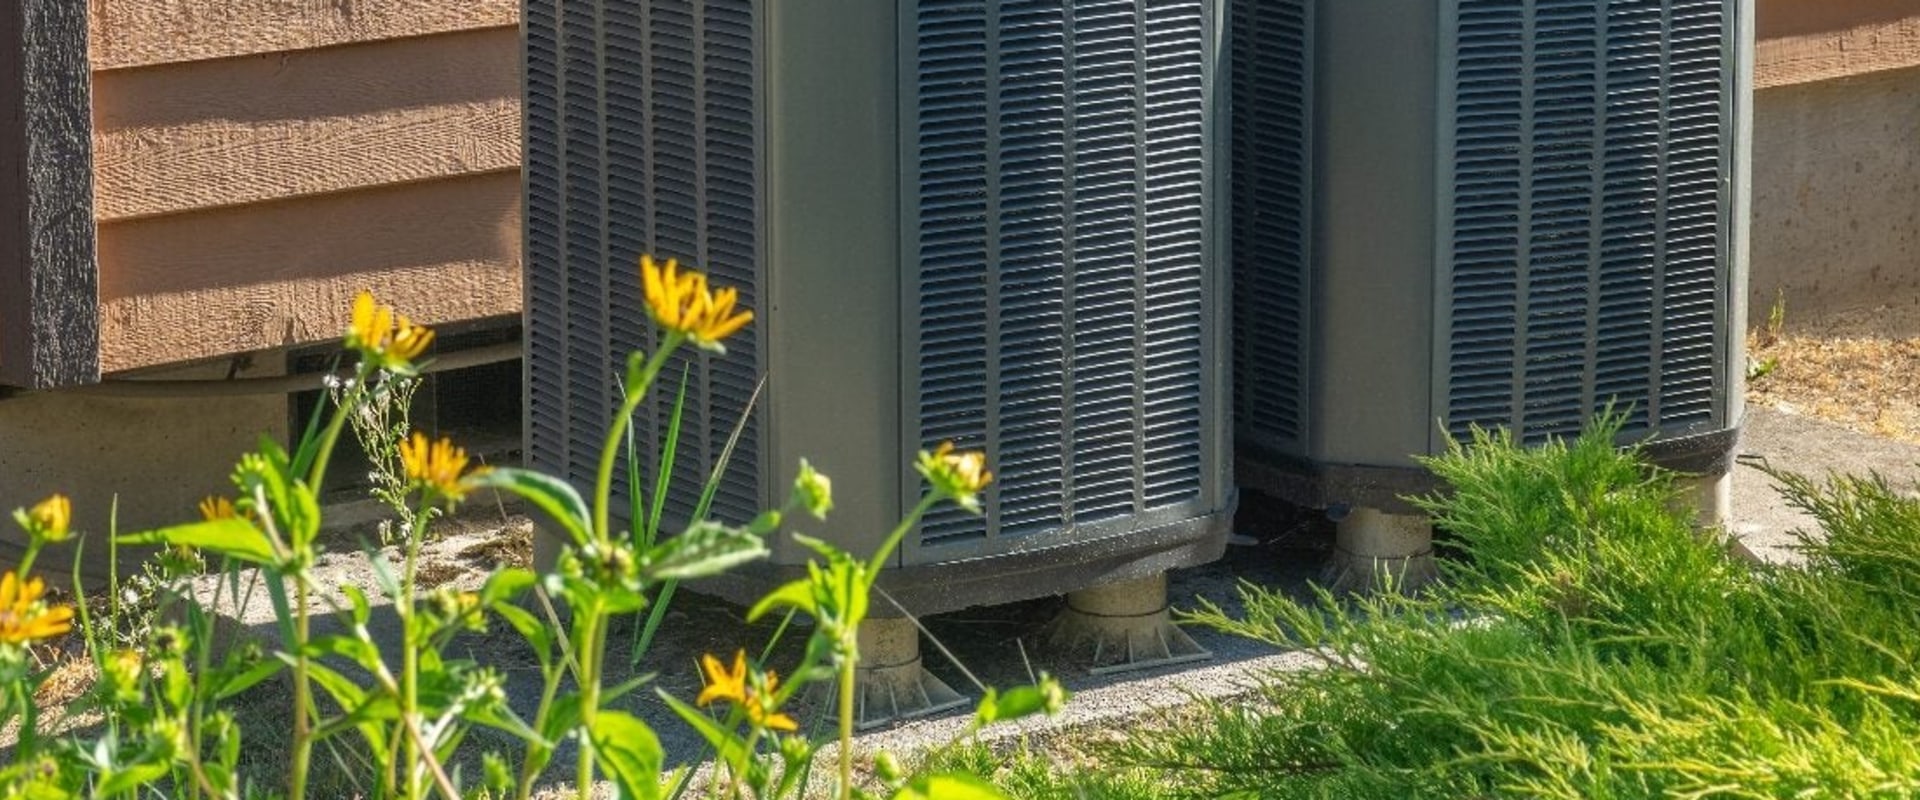 Which air conditioning system should I buy?